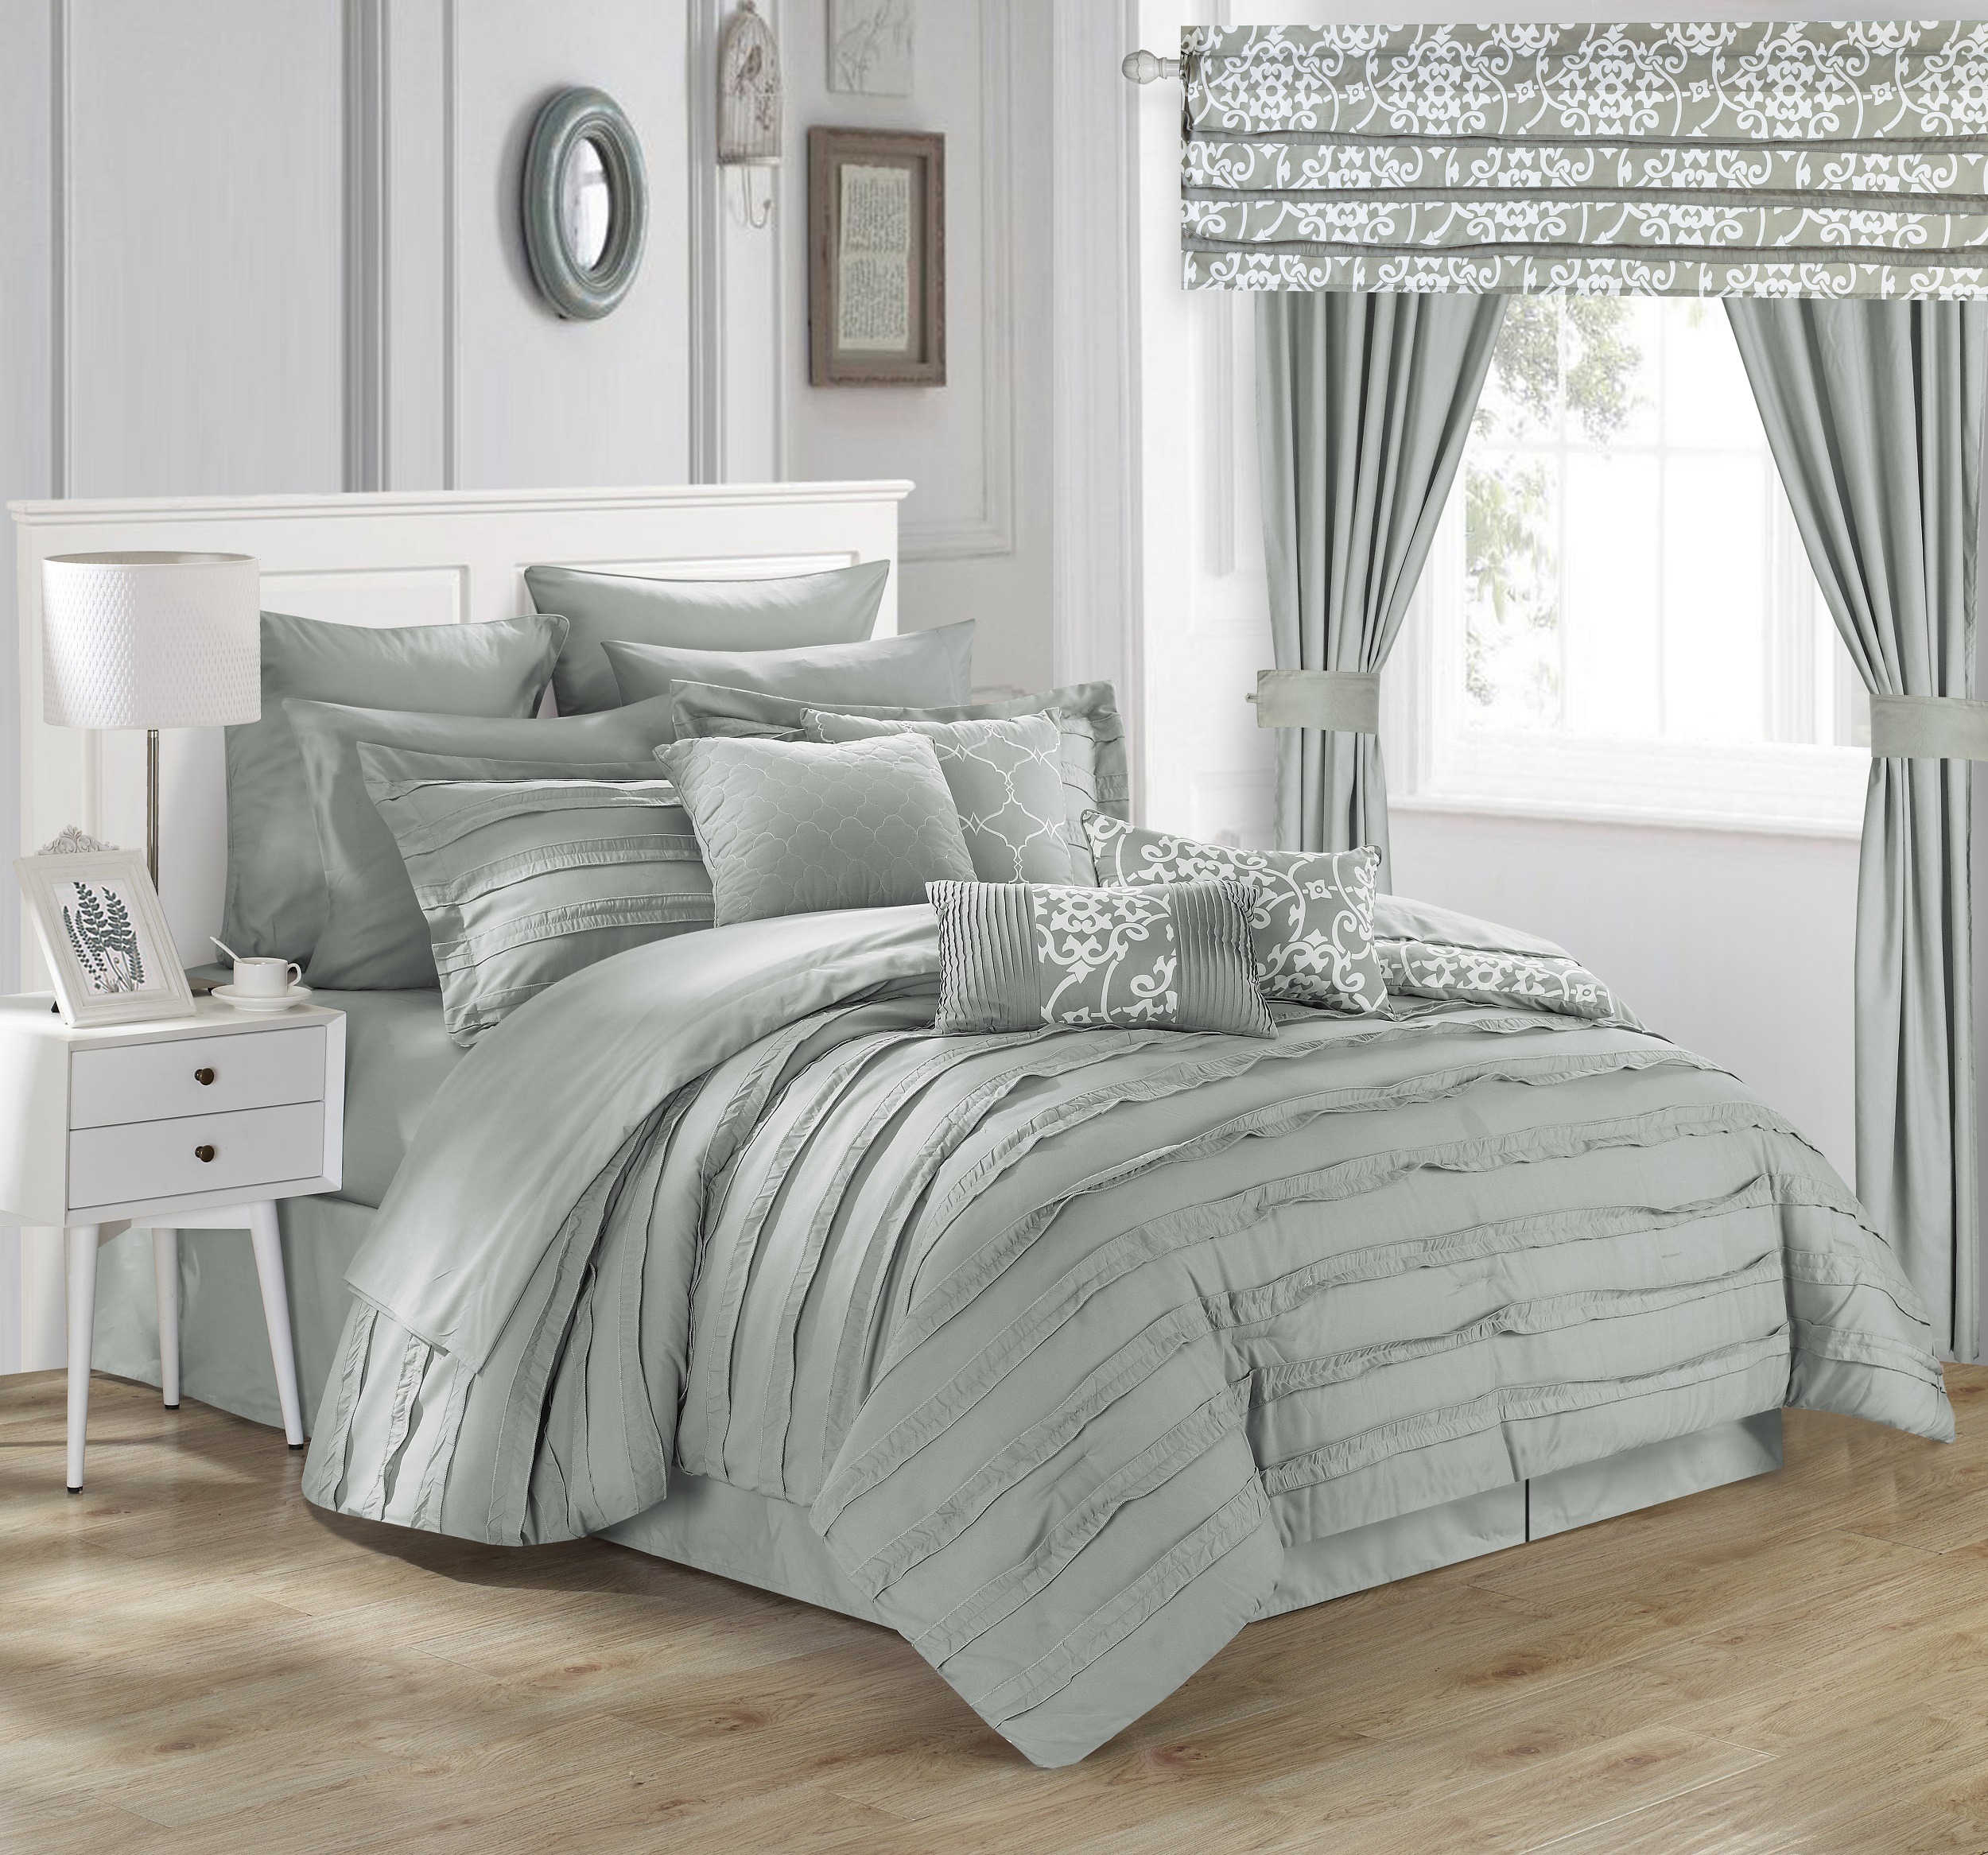 Chic Home Hailee 24pc Queen Size Comforter Set - Silver